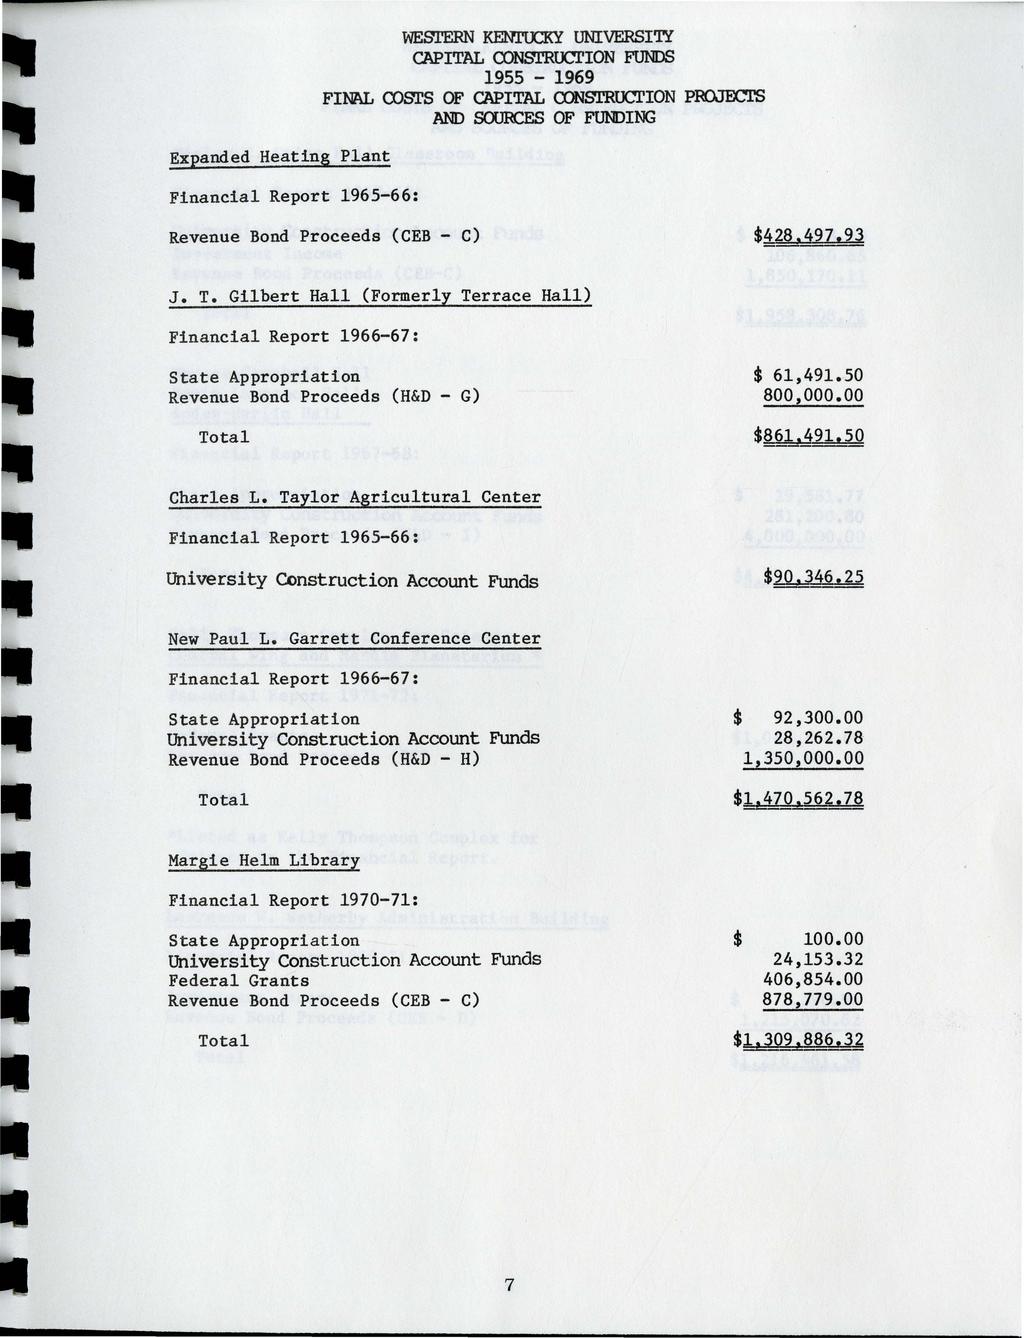 Expanded Heating Plant Financial Report 1965-66: WESTERN KENrOCKY UNIVERSITY CAPITAL CONSl'RUCl'ION FUNDS FINAL COSTS OF CAPITAL CON S-r.